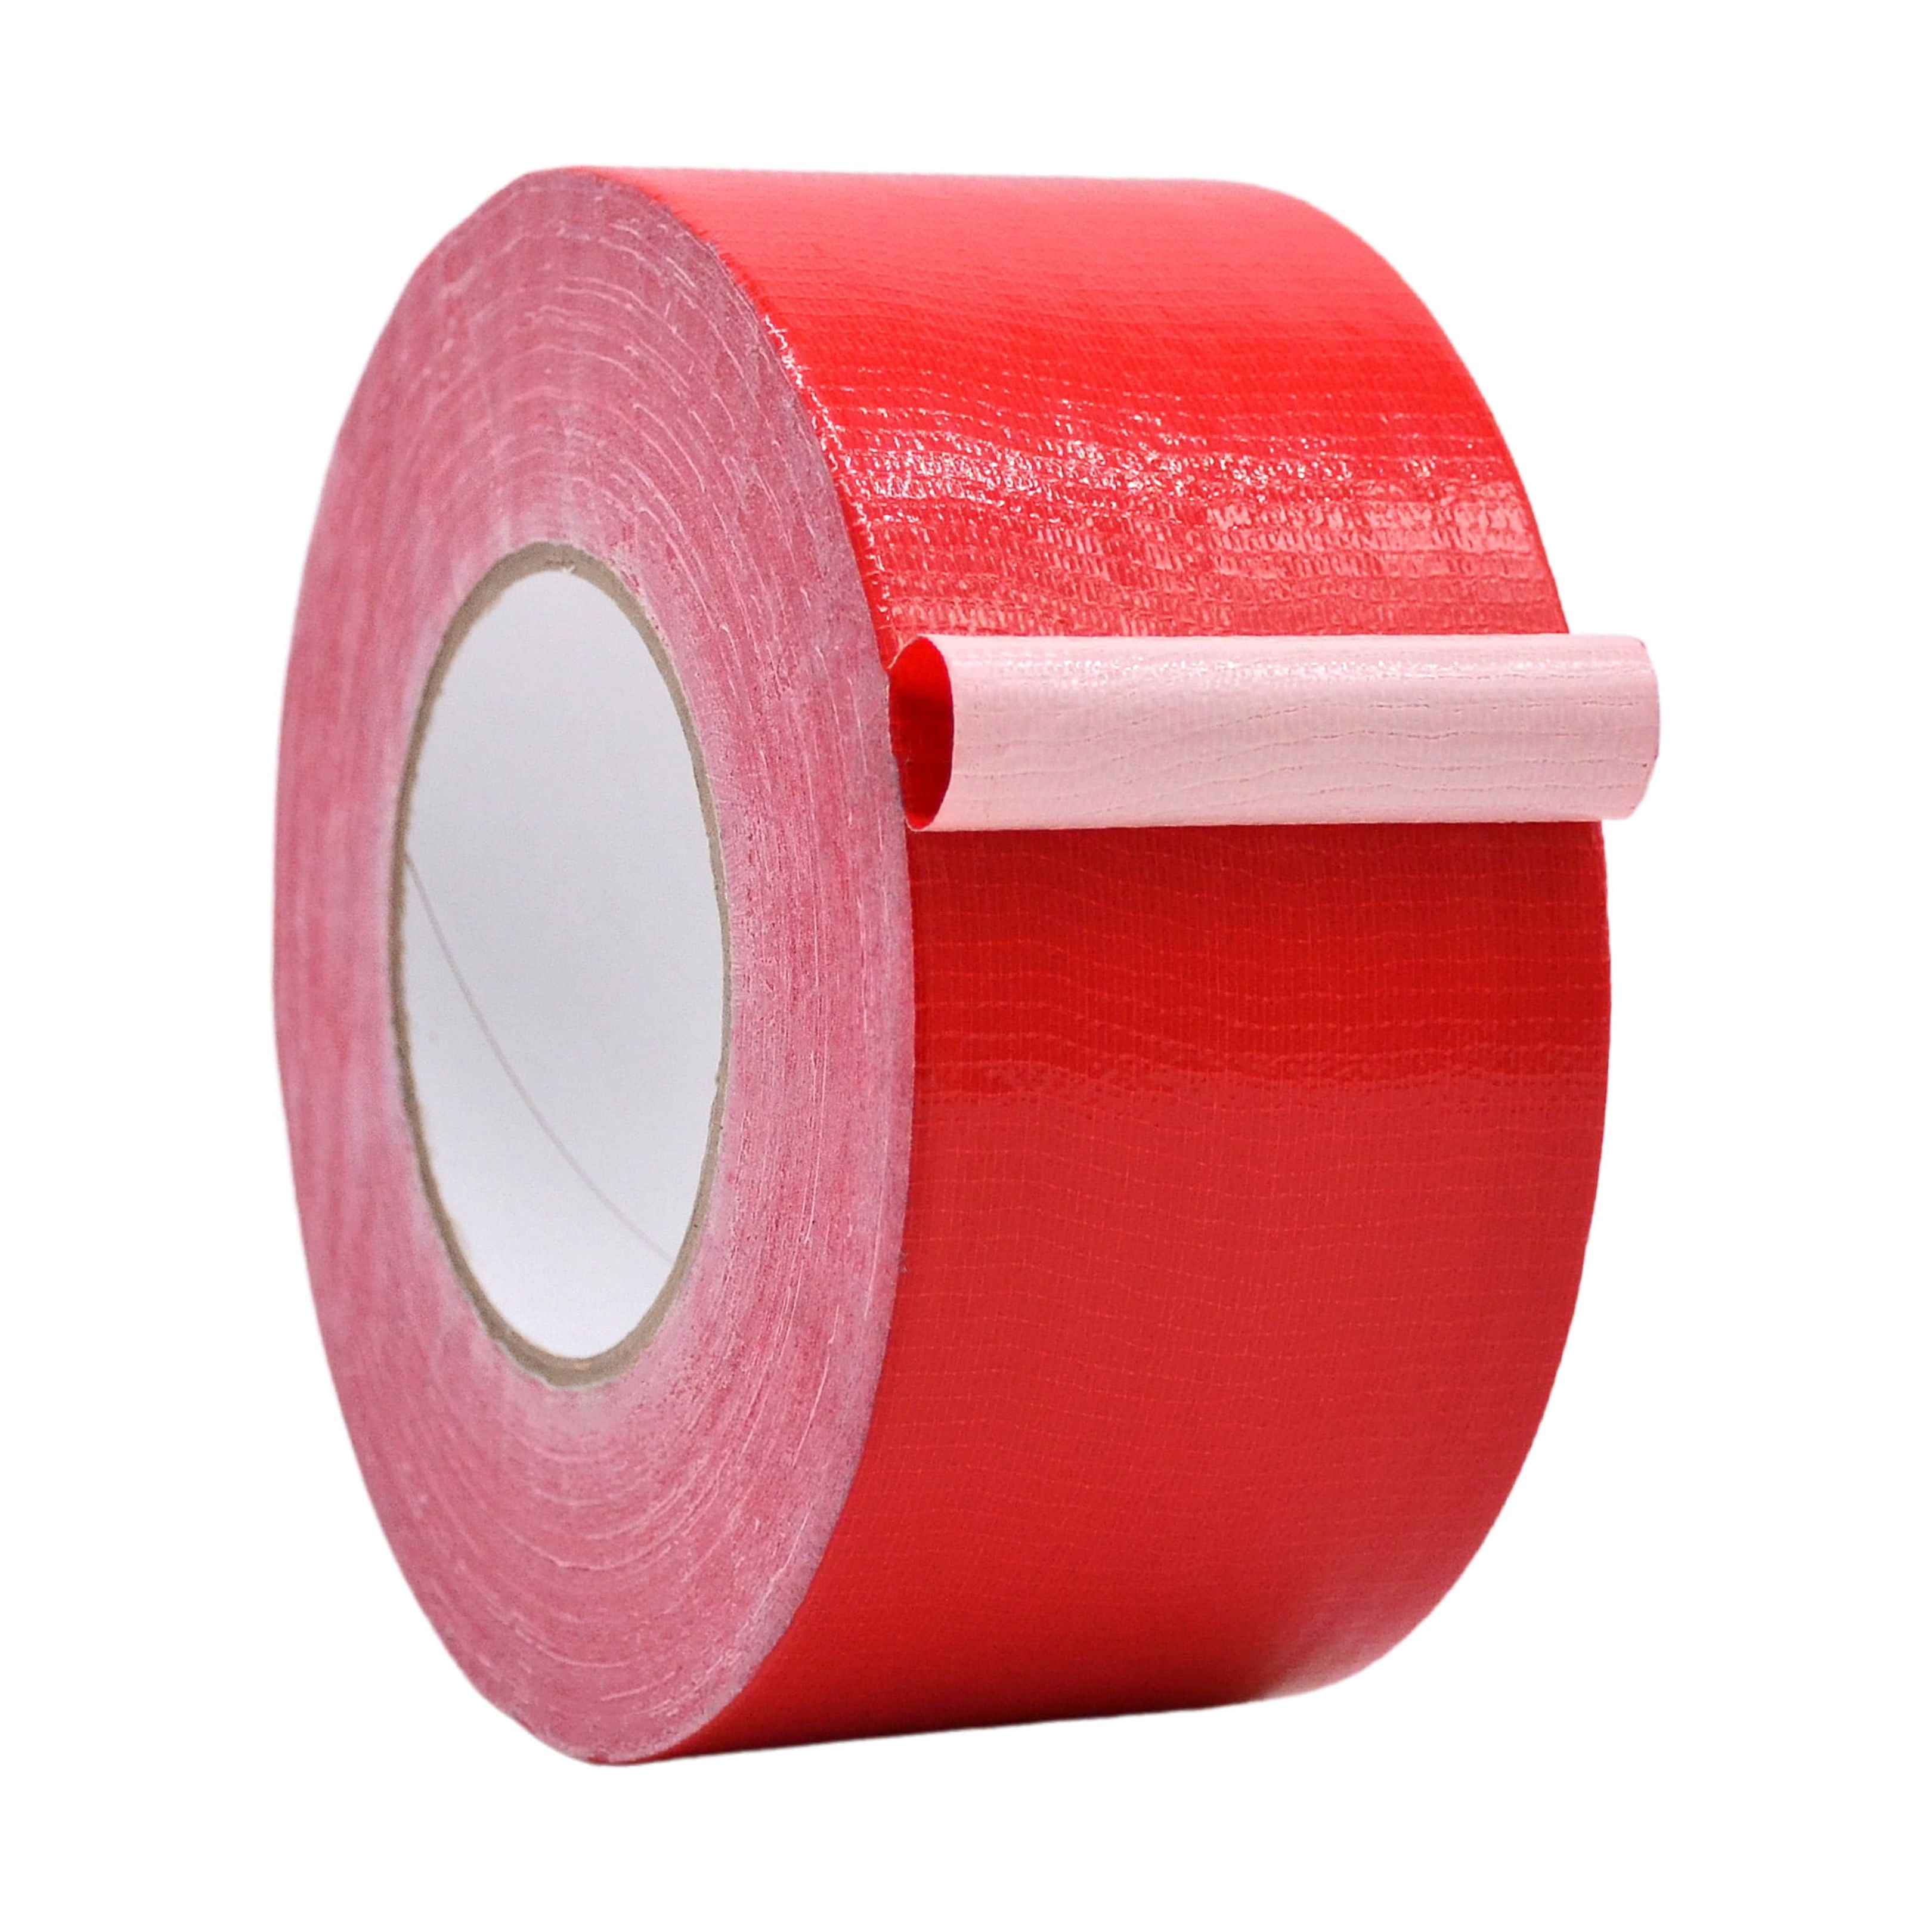 WOD Tape White Duct Tape 1.42 in x 60 yd. Strong Waterproof DTC10 